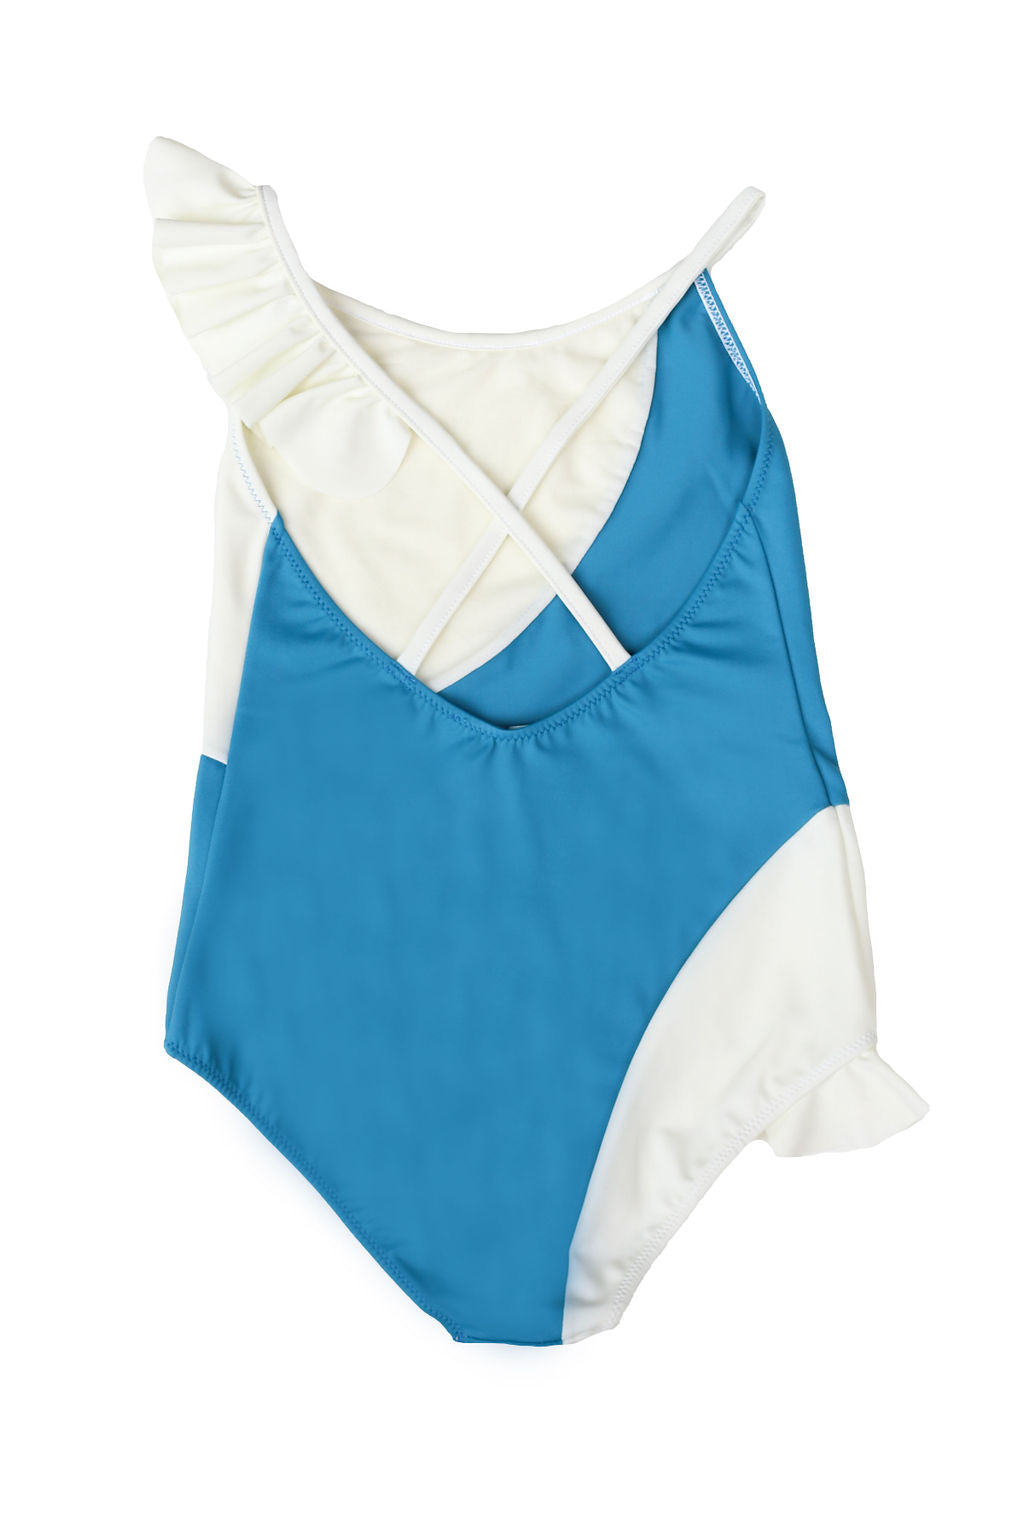 Coco One Piece Swimsuit Skyblue And Ivory